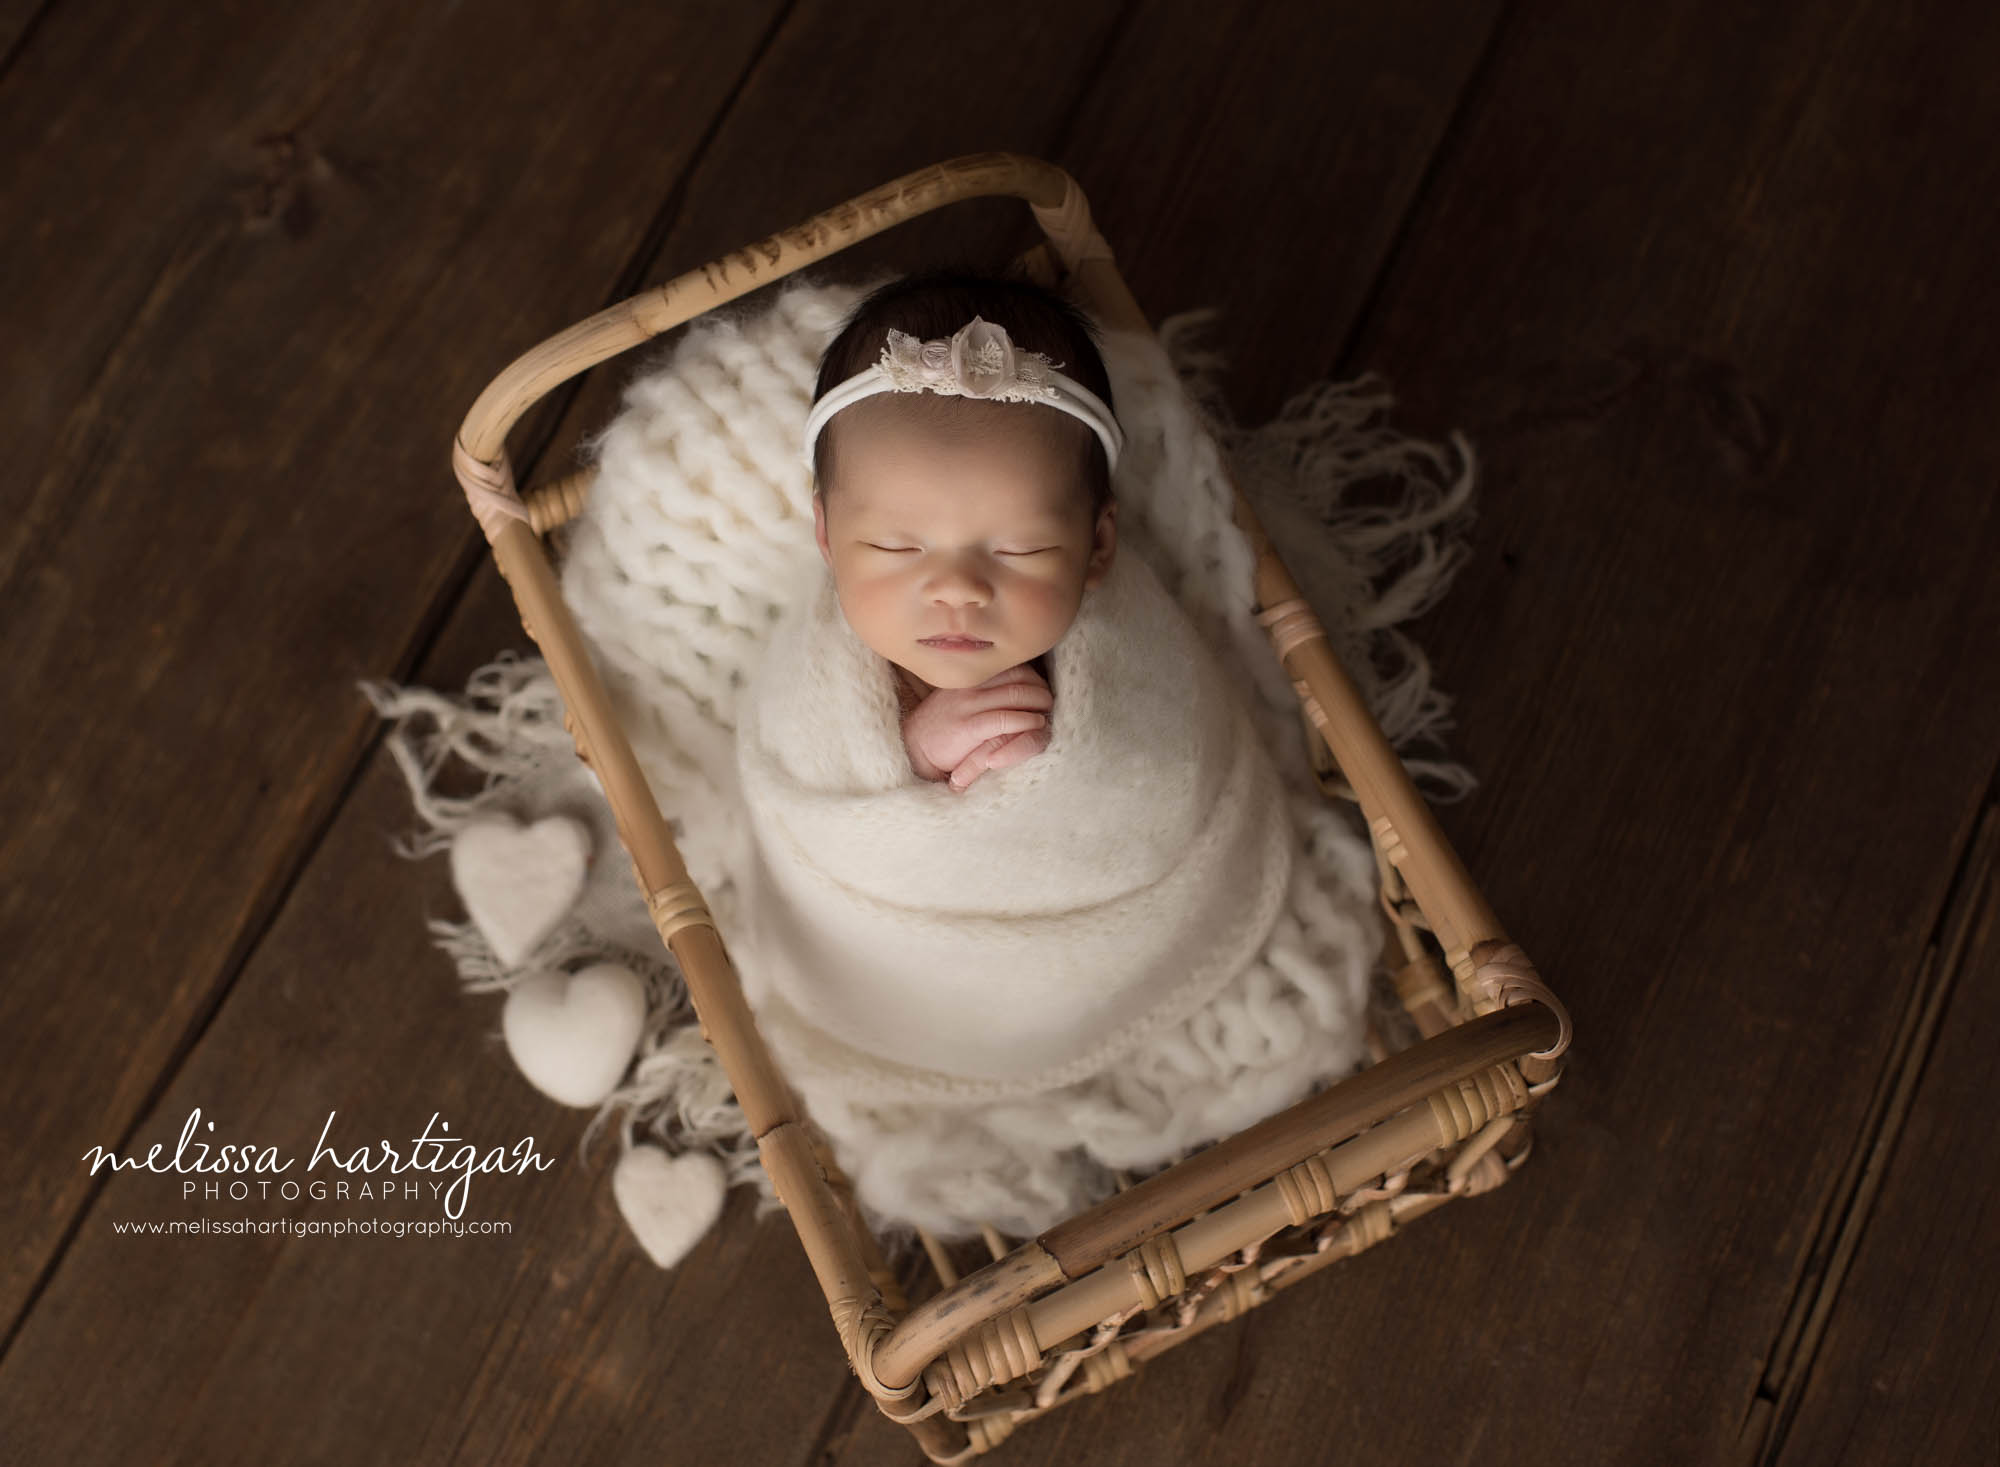 newborn baby girl wrapped in white knitted wrap posed in basket with white felted hearts newborn photoshoot